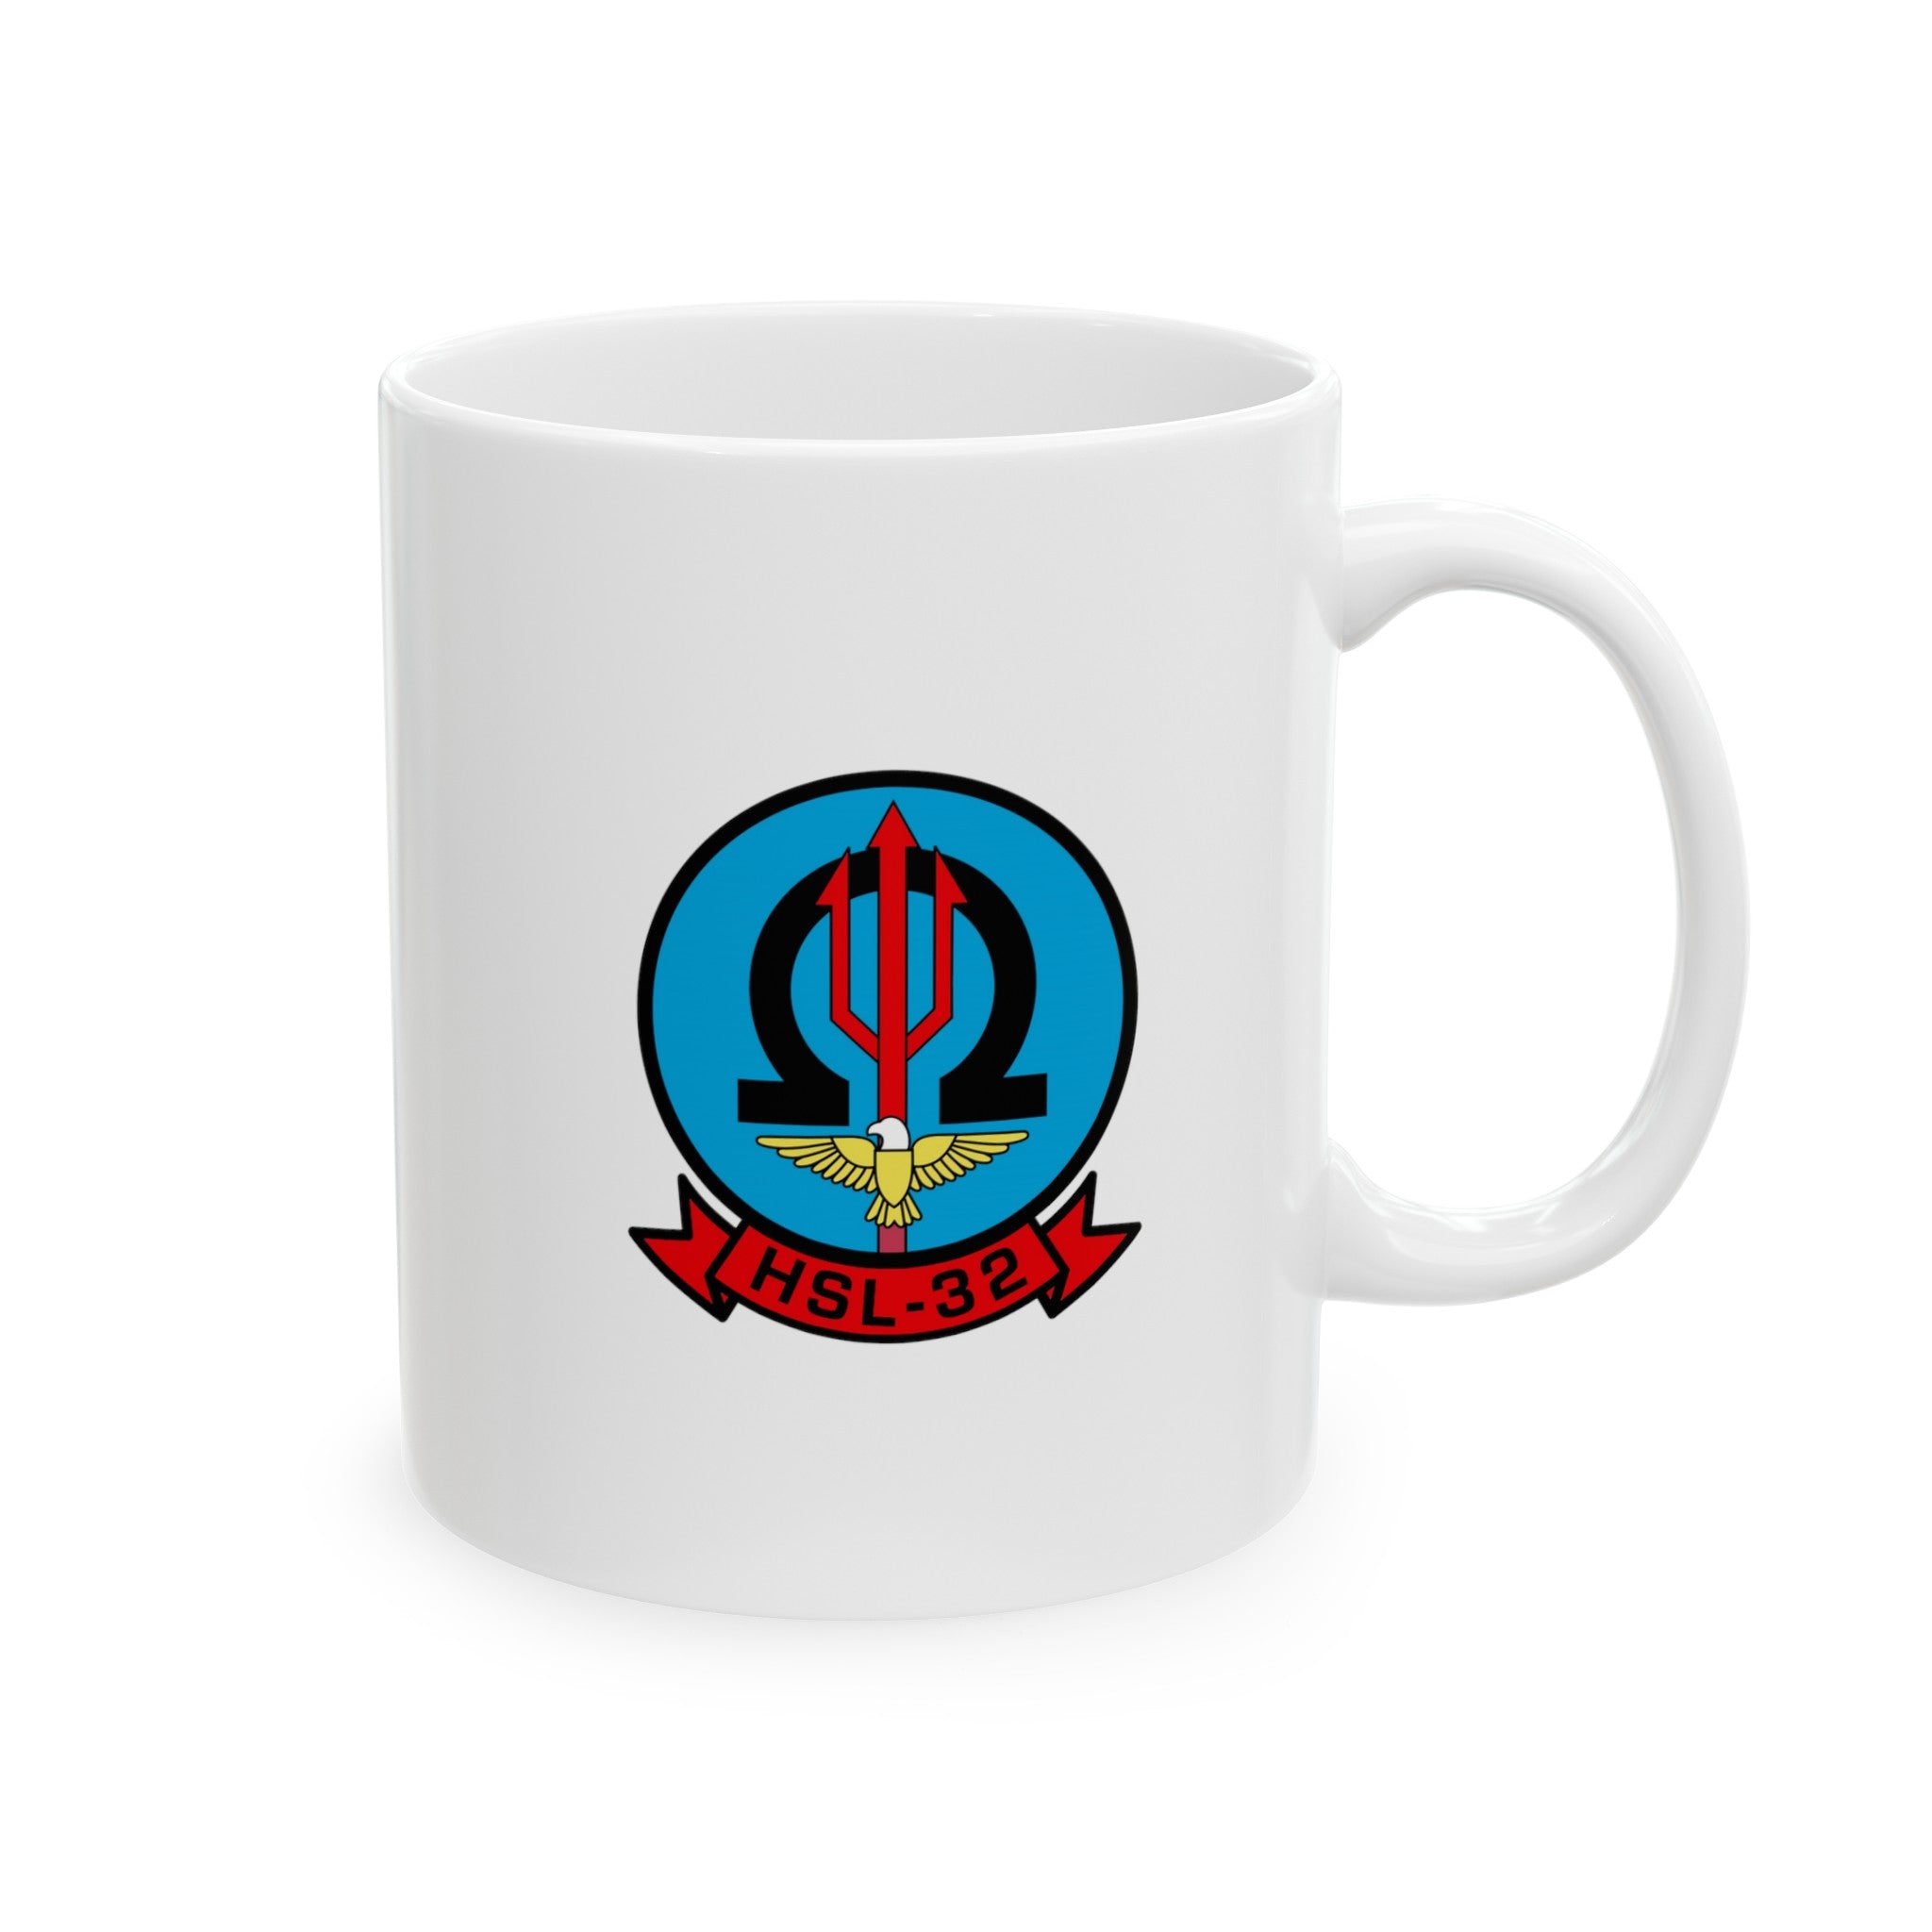 HSL-32 "Invaders" Coffee Mug,  Navy, Helicopter ASW Squadron Light flying the SH-2 Seasprite